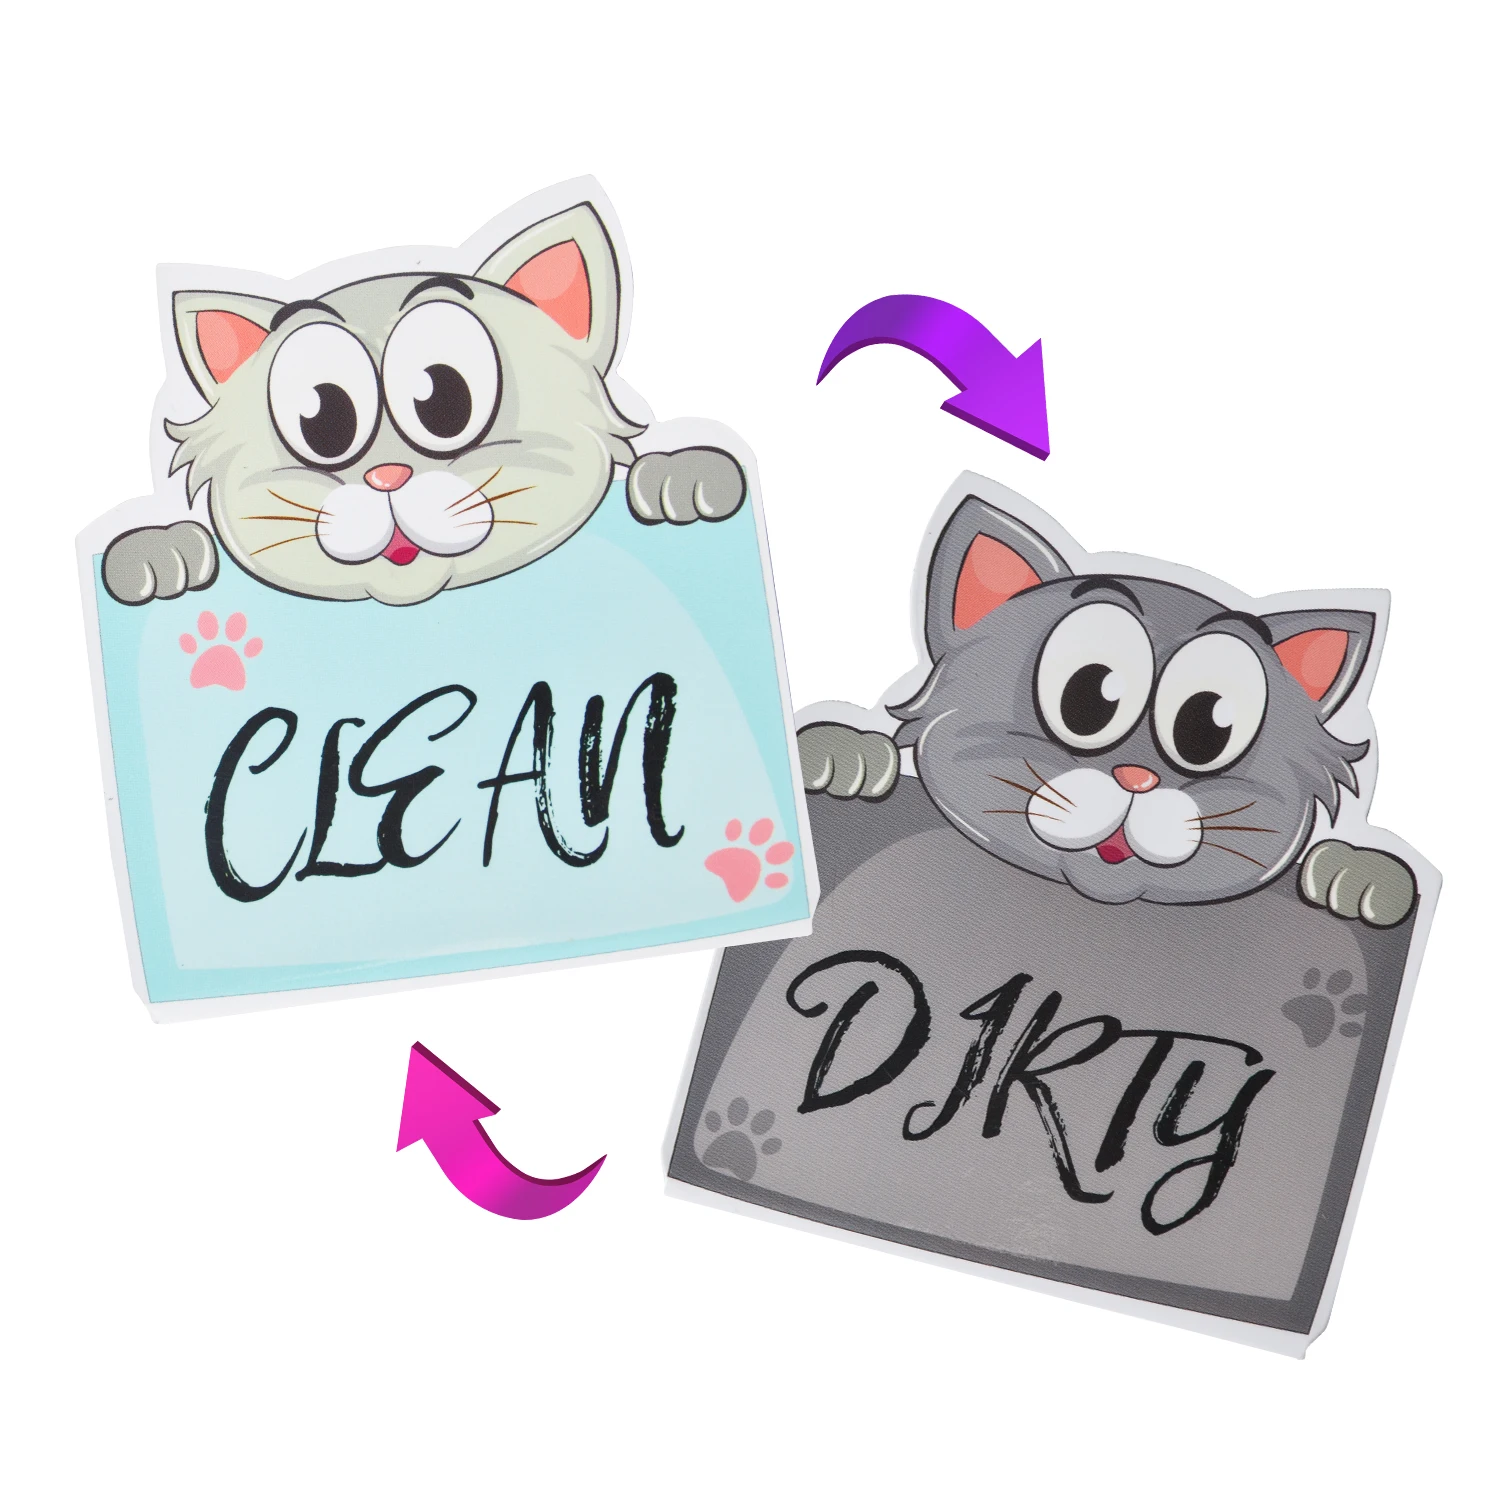 9*8cm Cute cat dog double sided soft magnet "CLEAN DIRTY" sign magnetic sticker for refrigerator dishwasher washing machine